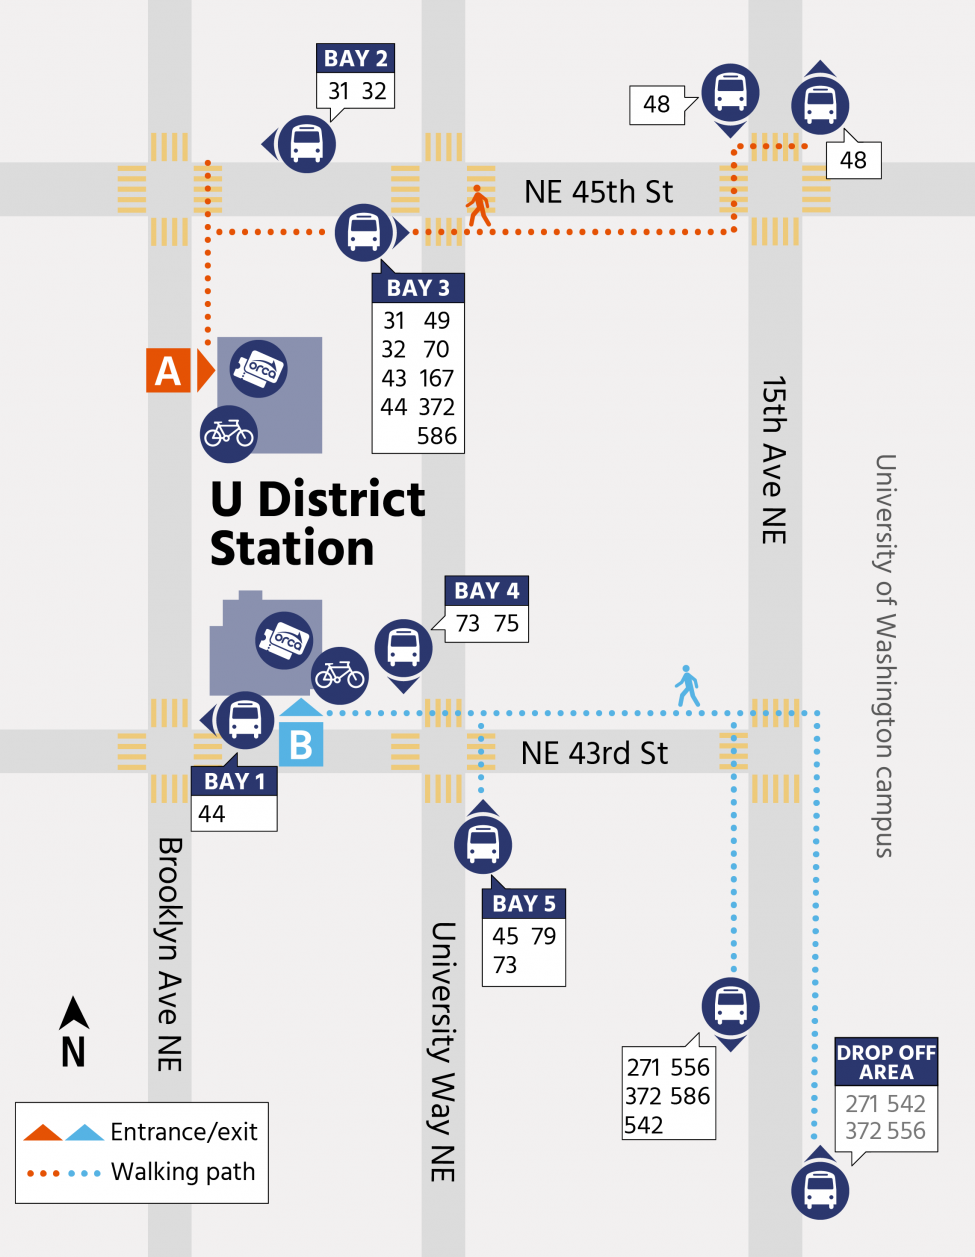 Map illustrating walking path for transfer from bus to link at the U District Station.